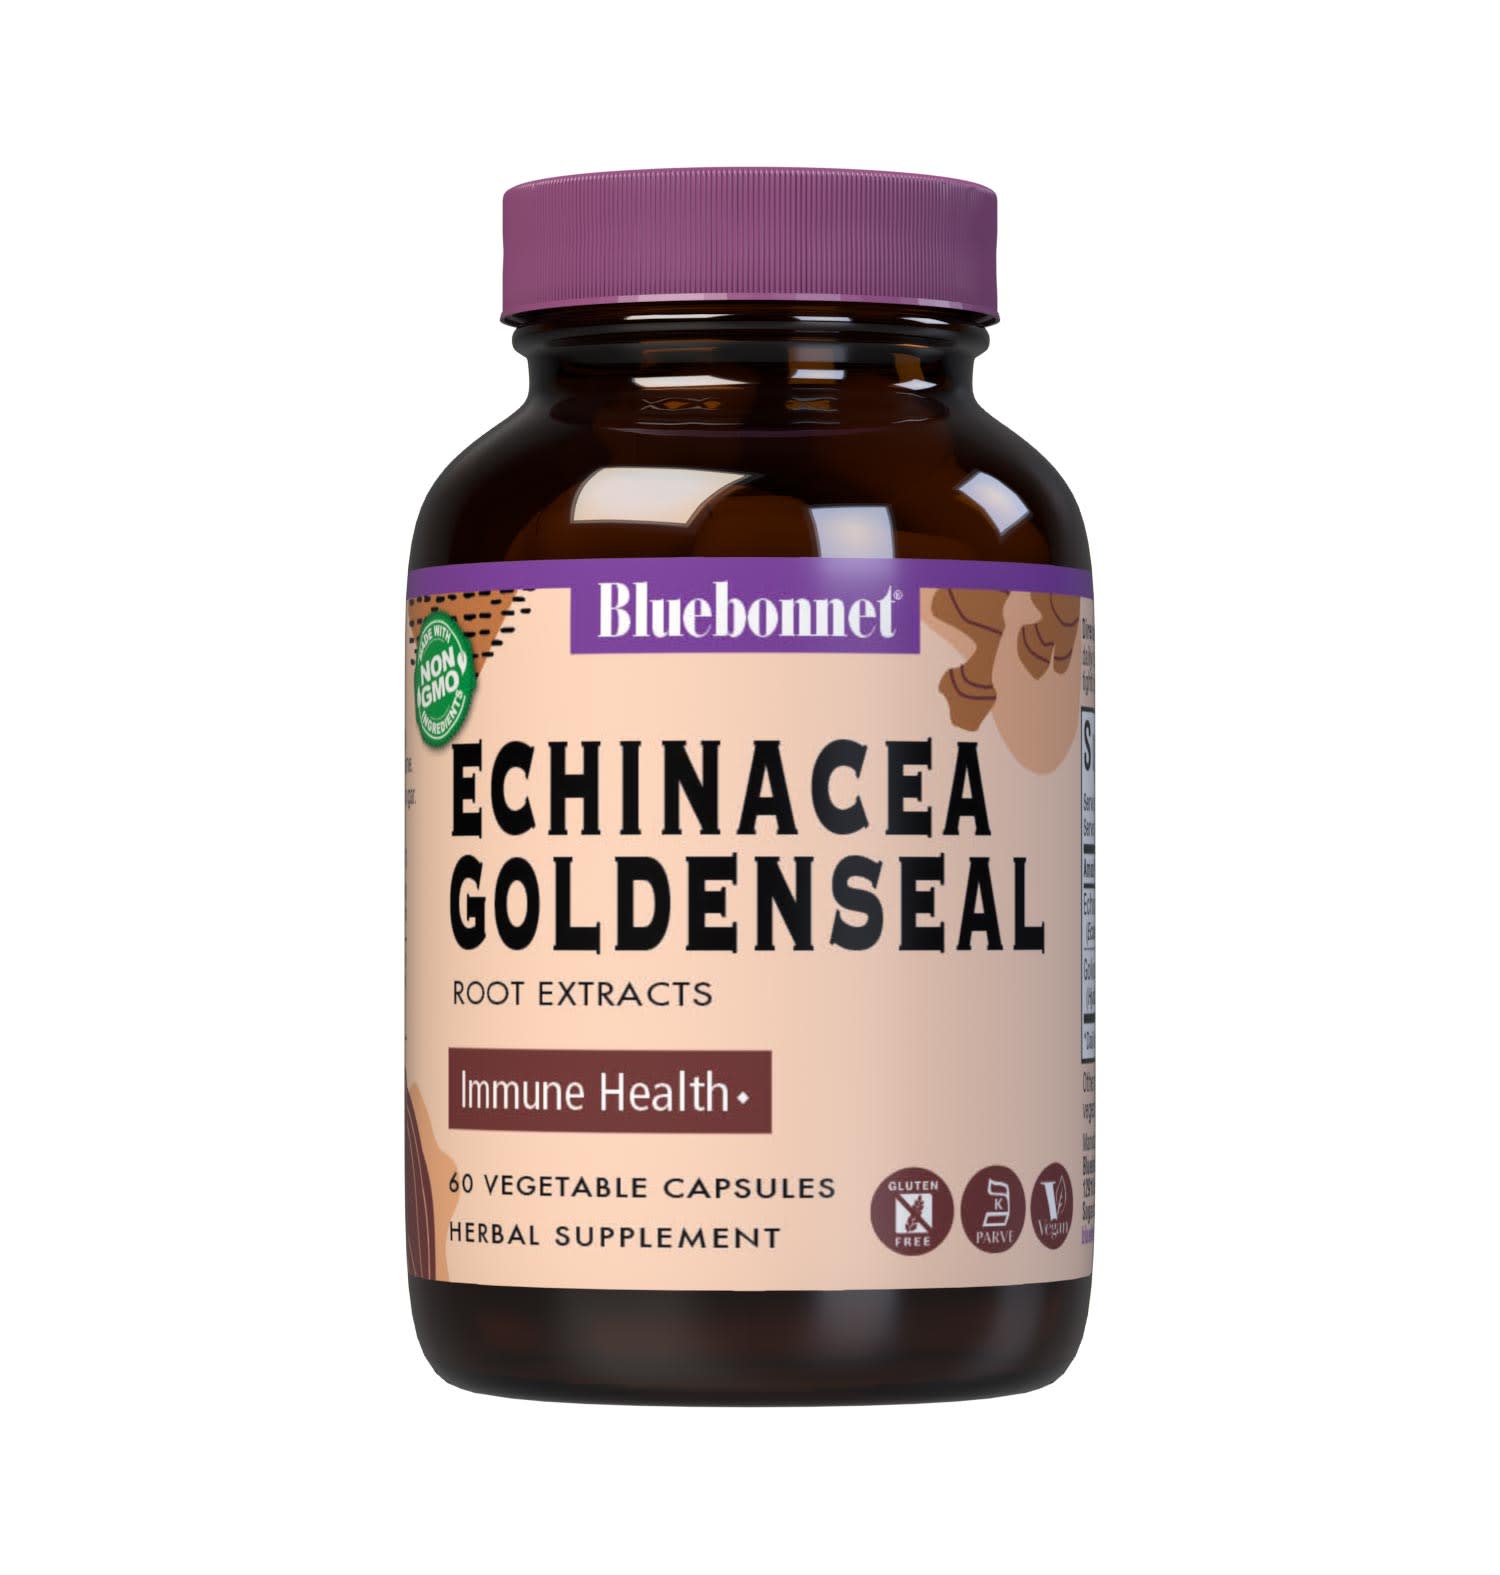 Bluebonnet’s Echinacea Goldenseal Root Extract 60 Vegetable Capsules contain a standardized extract of echinacosides and alkaloids, the most researched active constituents found in echinacea and goldenseal, respectively. A clean and gentle water-based extraction method is employed to capture and preserve both echinacea and goldenseal’s most valuable components. #size_60 count